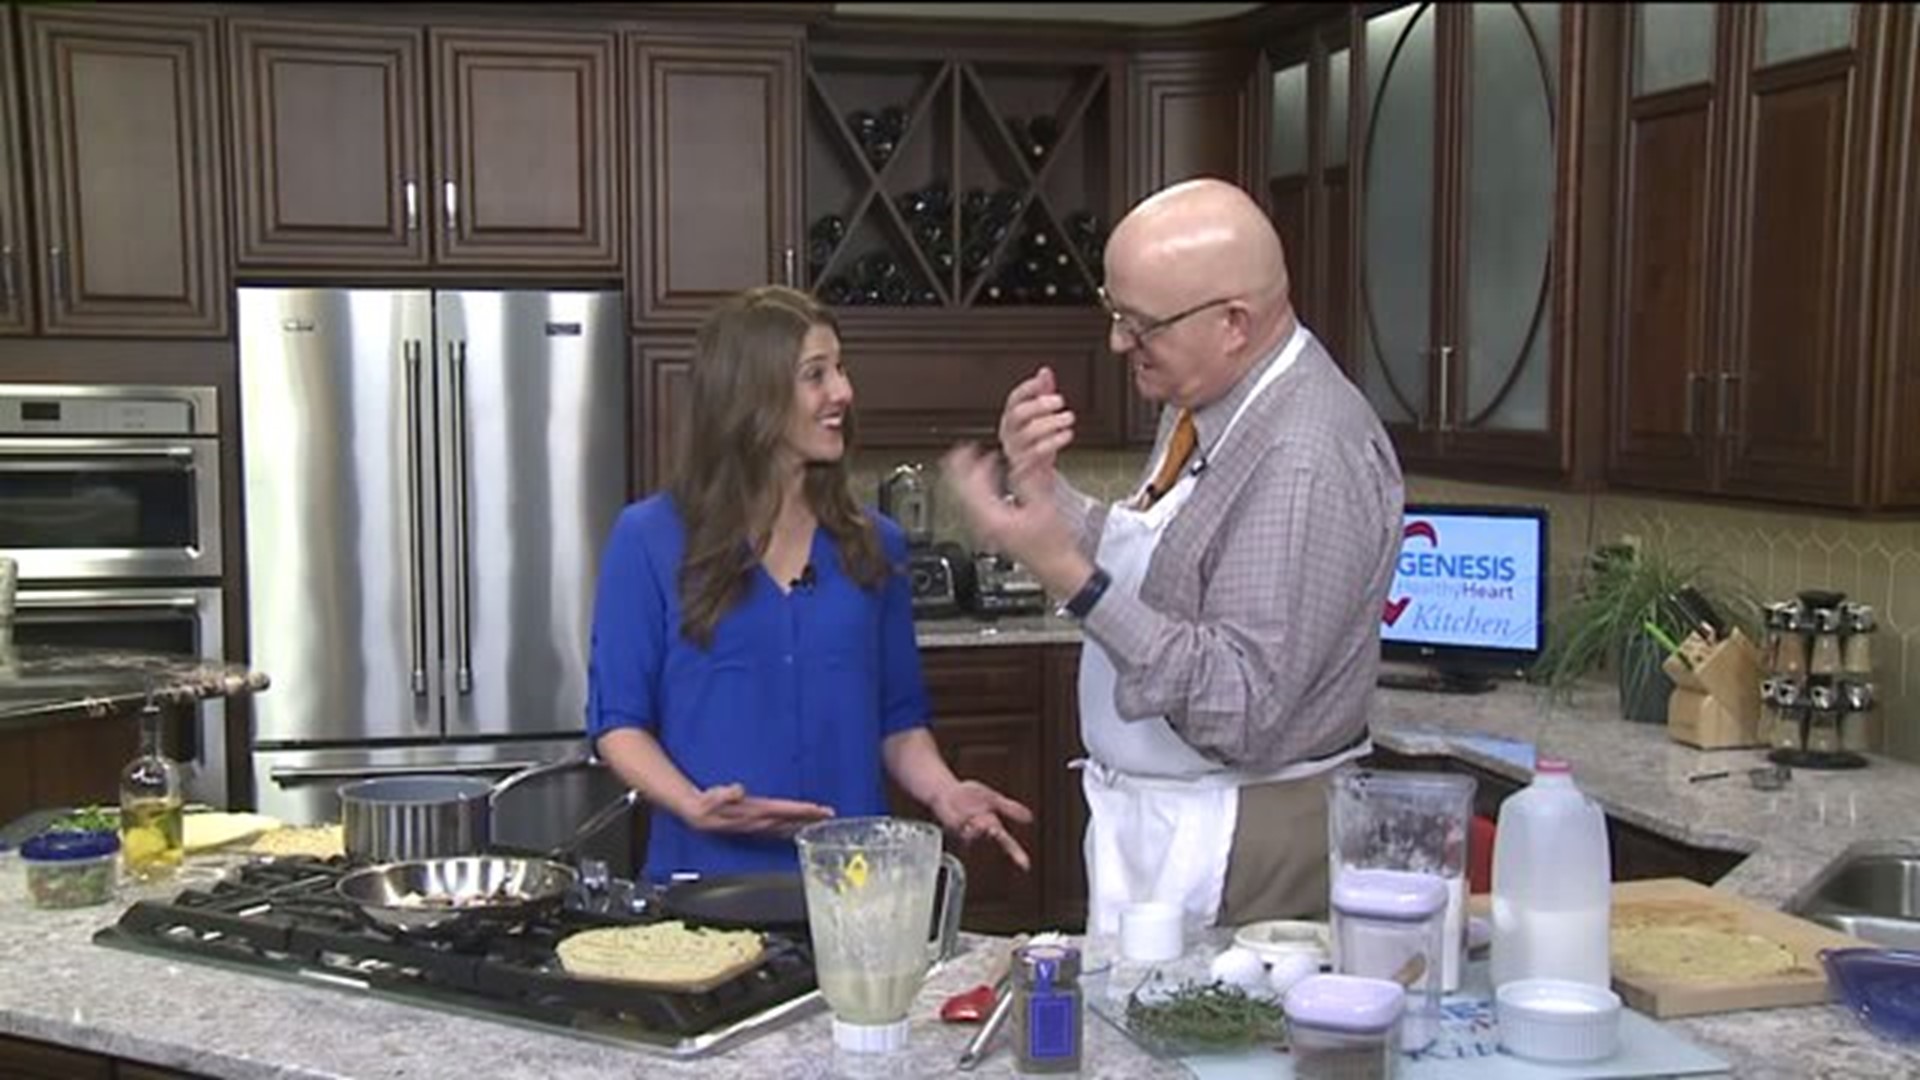 Genesis Heart Healthy Kitchen: Savory Crepes